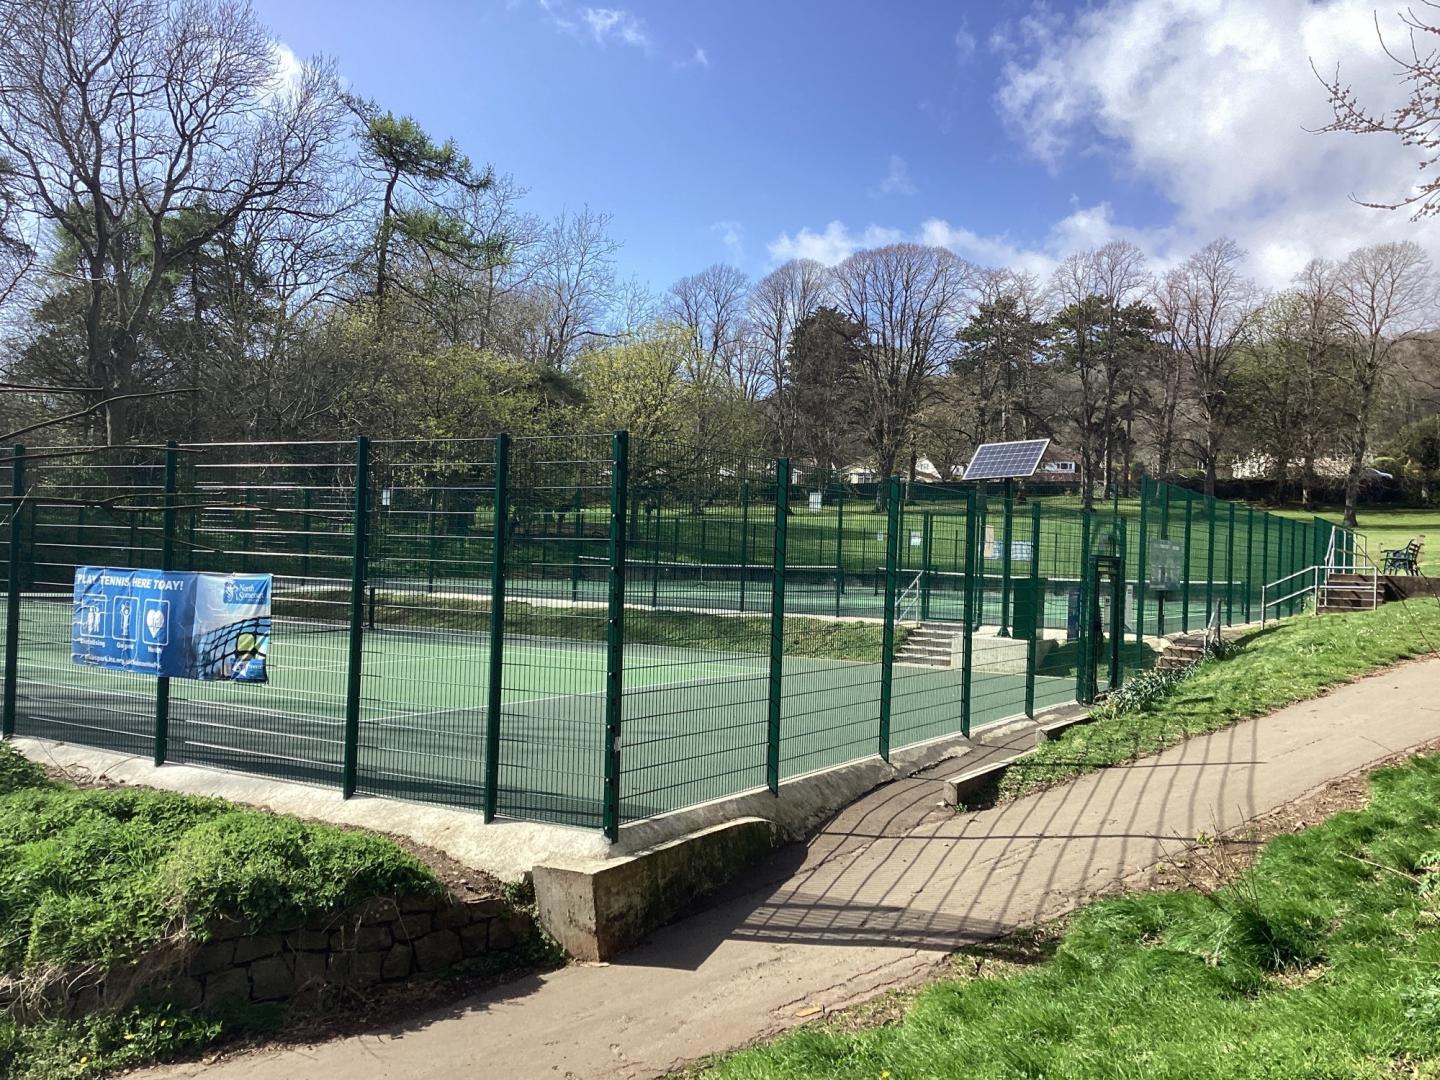 A photo of the newly refurbished tennis courts at Ashcombe Park in Weston-super-Mare